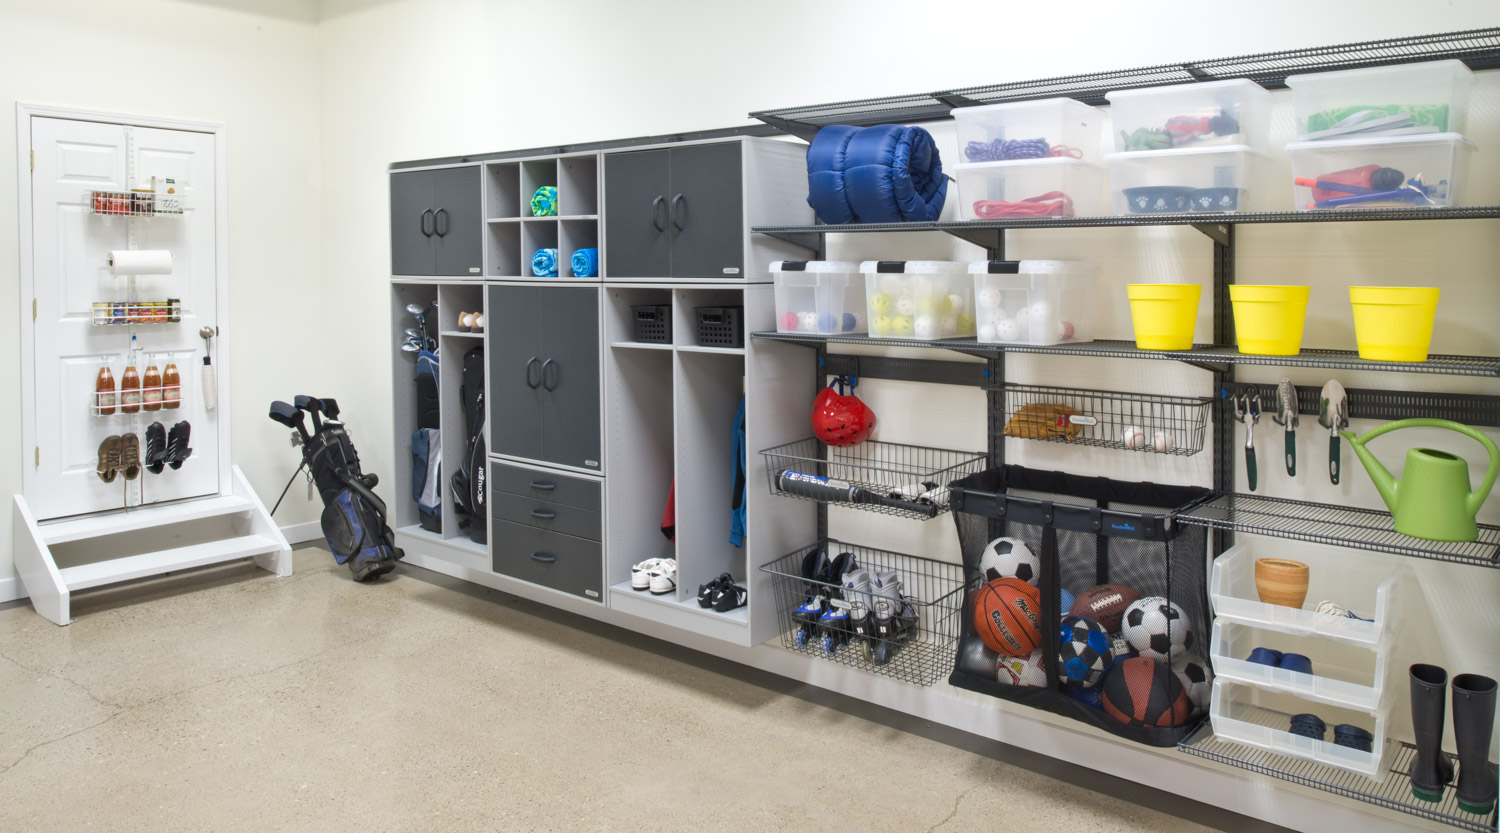 What Are the Most Common Items to Put into Storage?